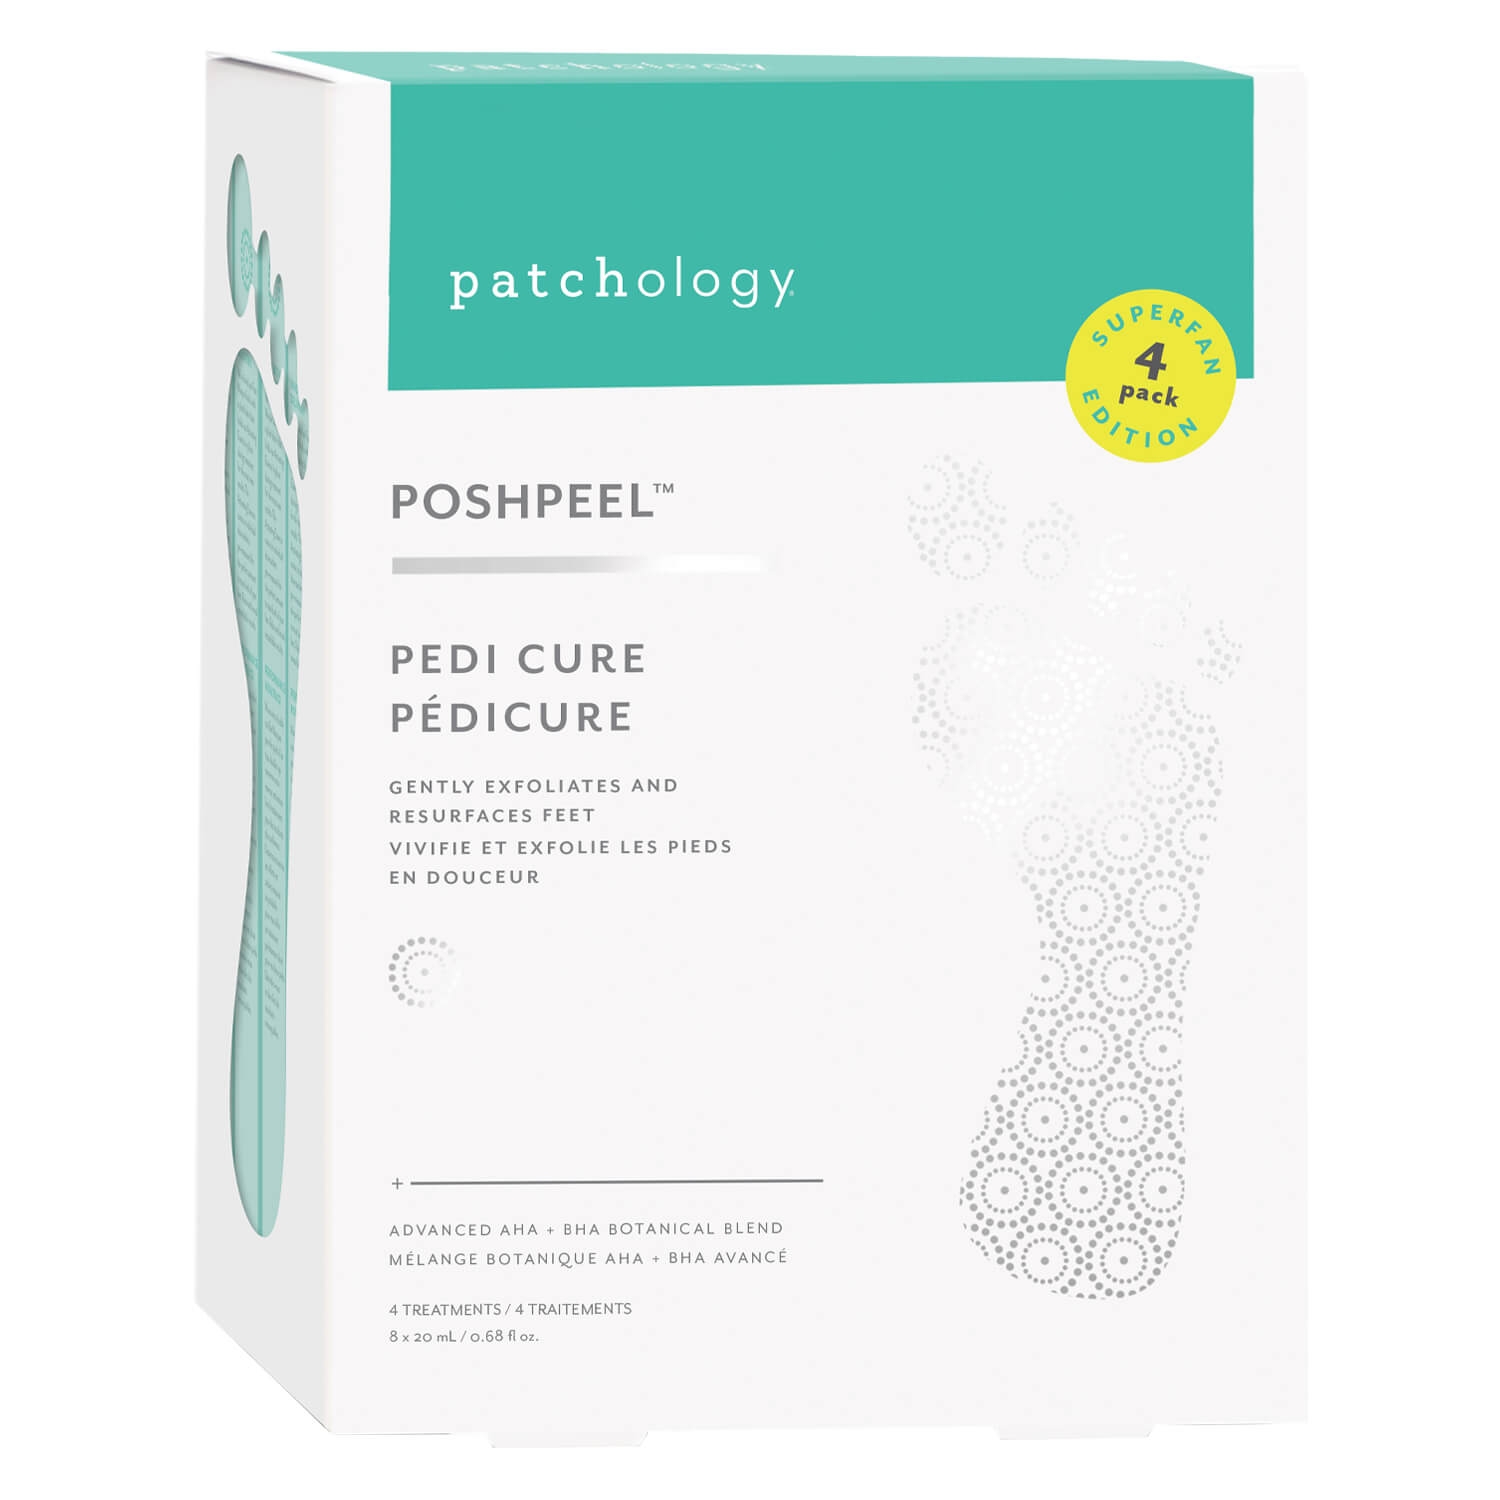 Product image from PoshPeel Pedi Cure Pack